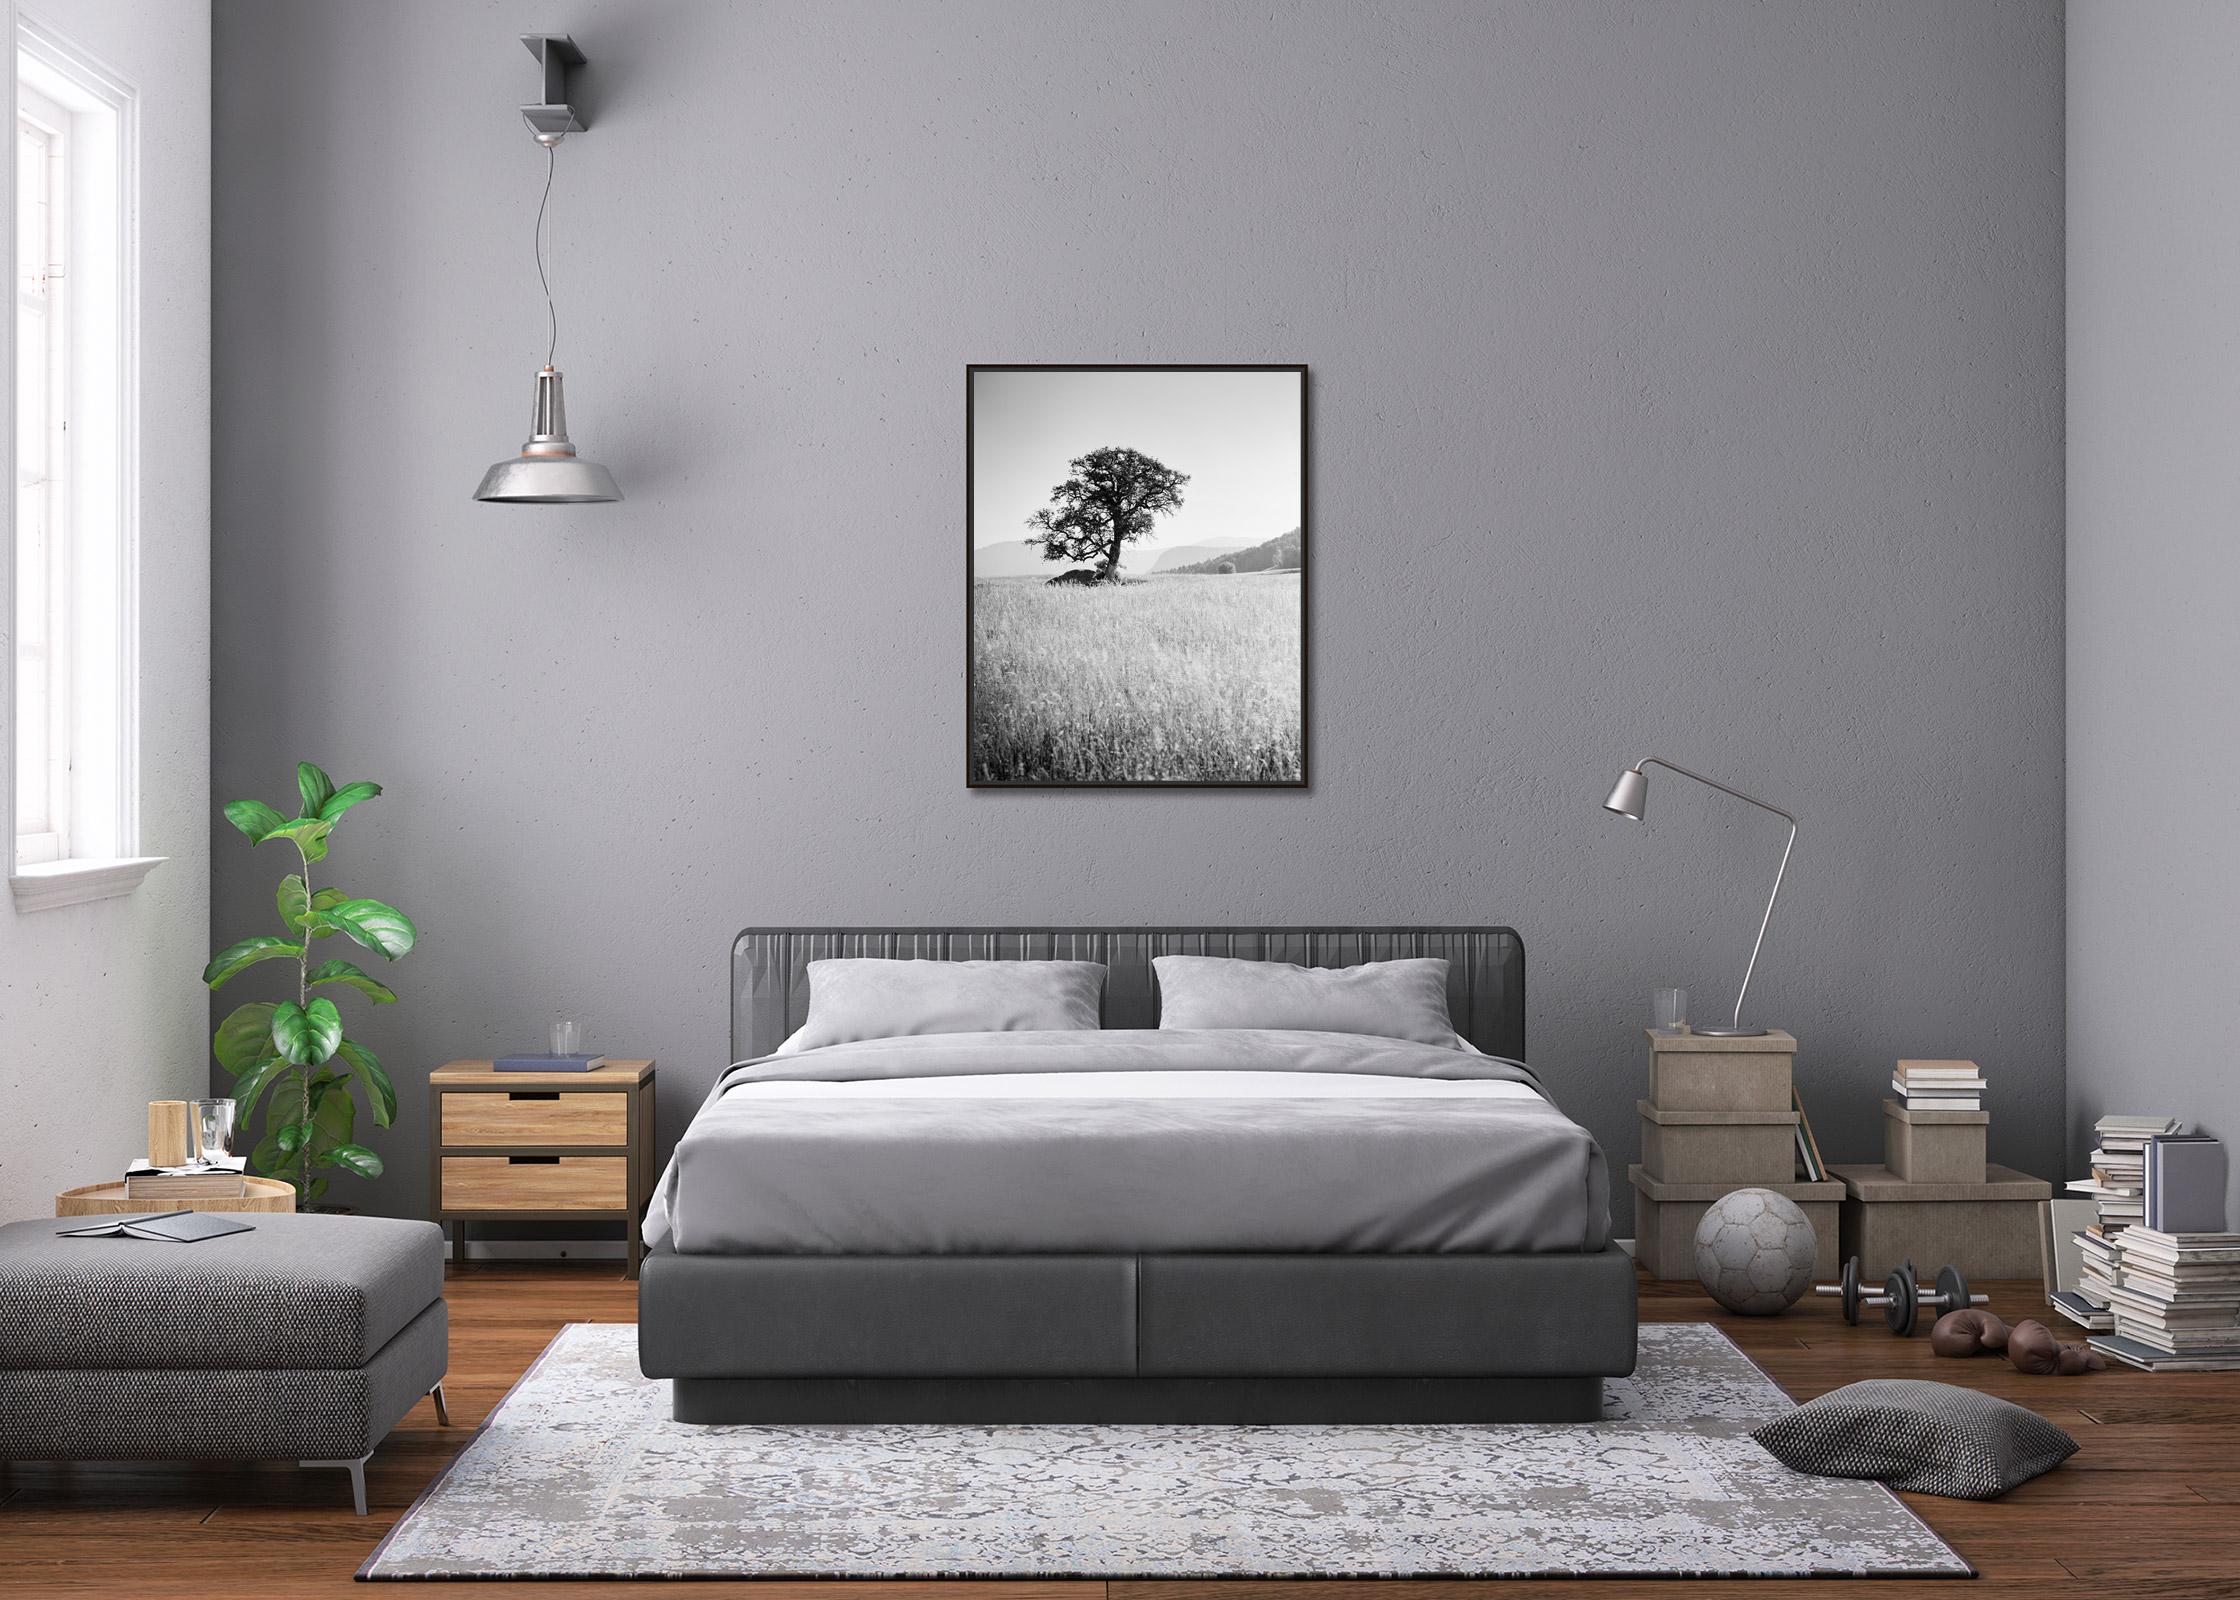 Morning Sun, single tree, Seiser Alm, black and white landscape, art photography For Sale 1